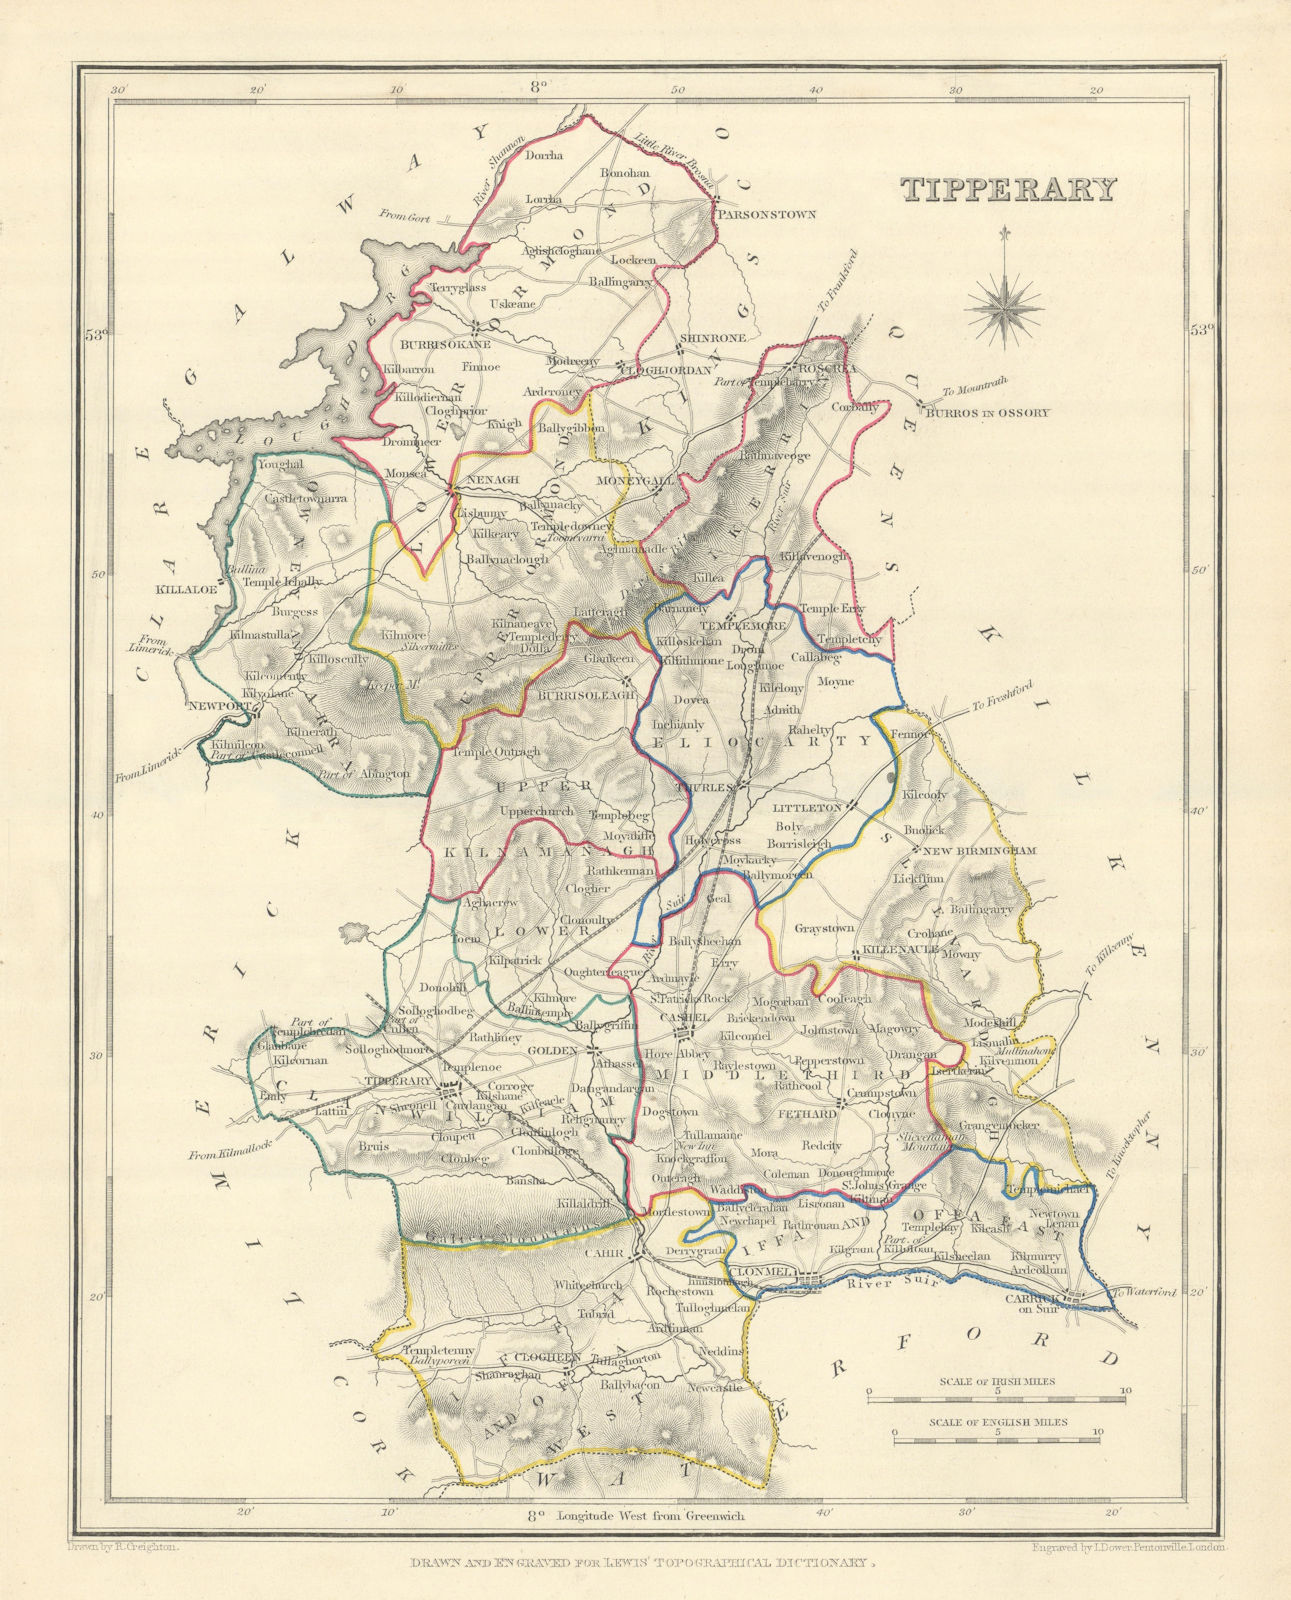 COUNTY TIPPERARY antique map for LEWIS by CREIGHTON & DOWER. Ireland 1850